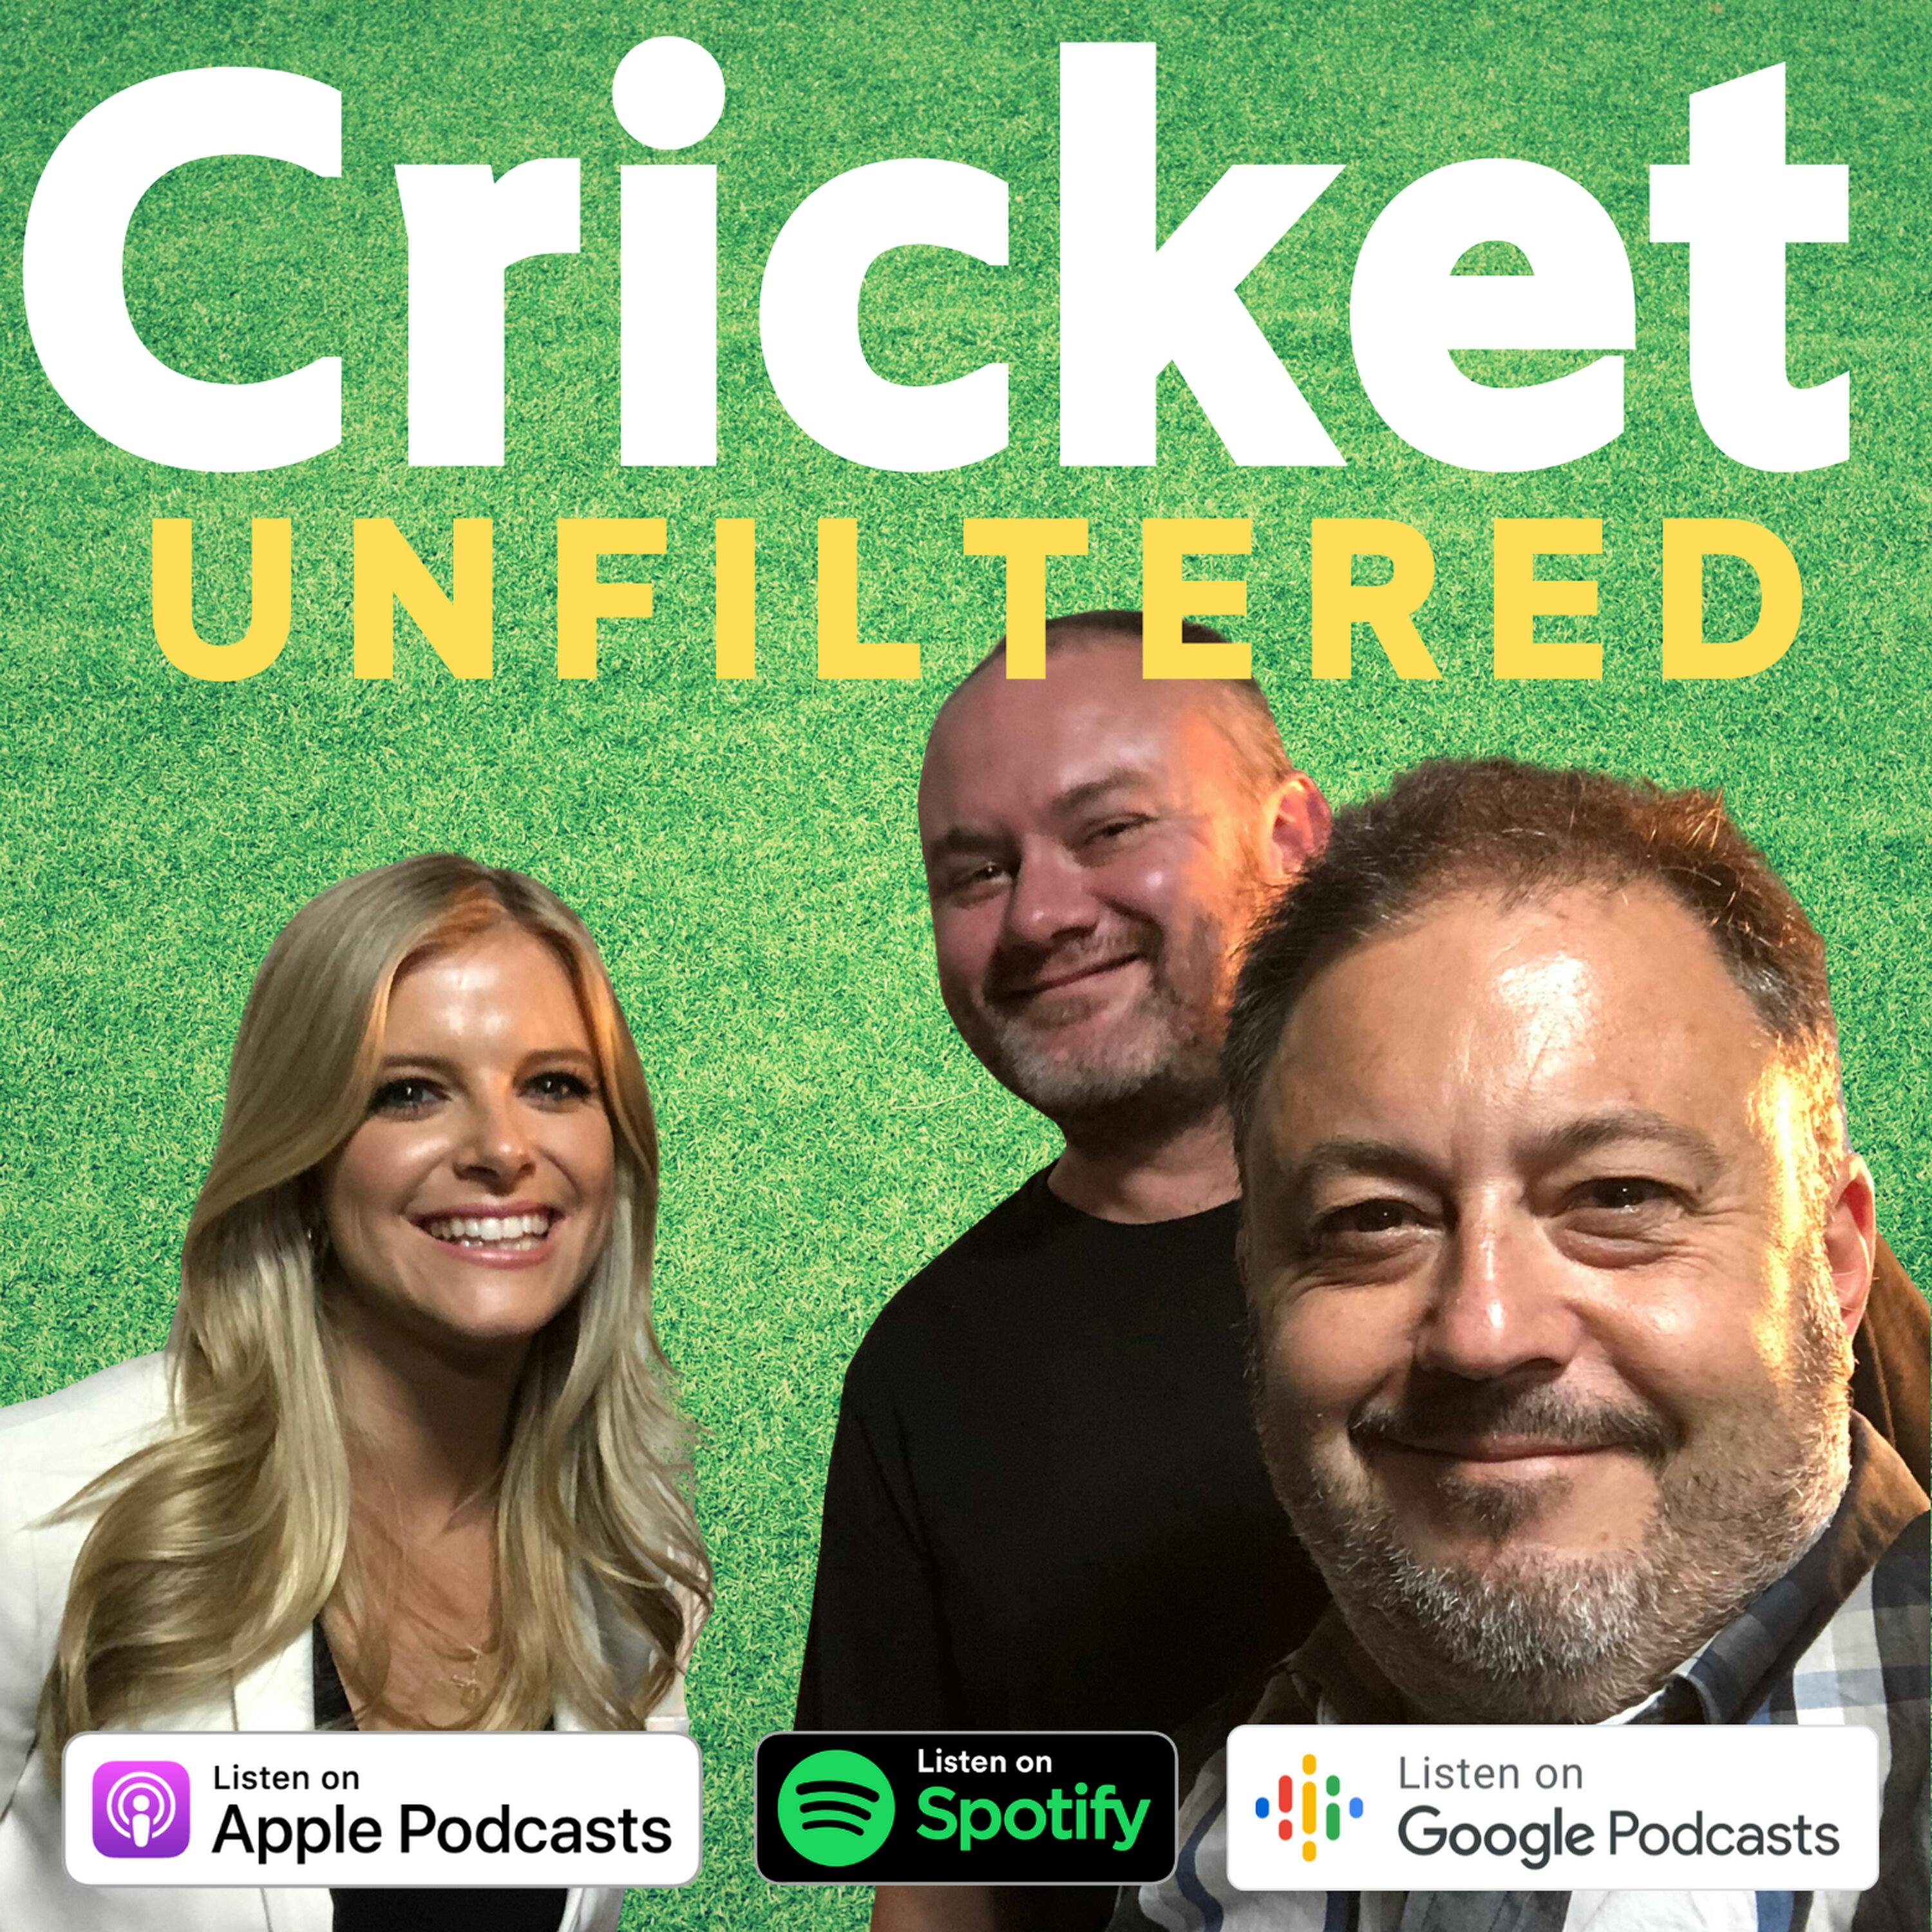 Cricket in Trouble? & The Test Episode 3